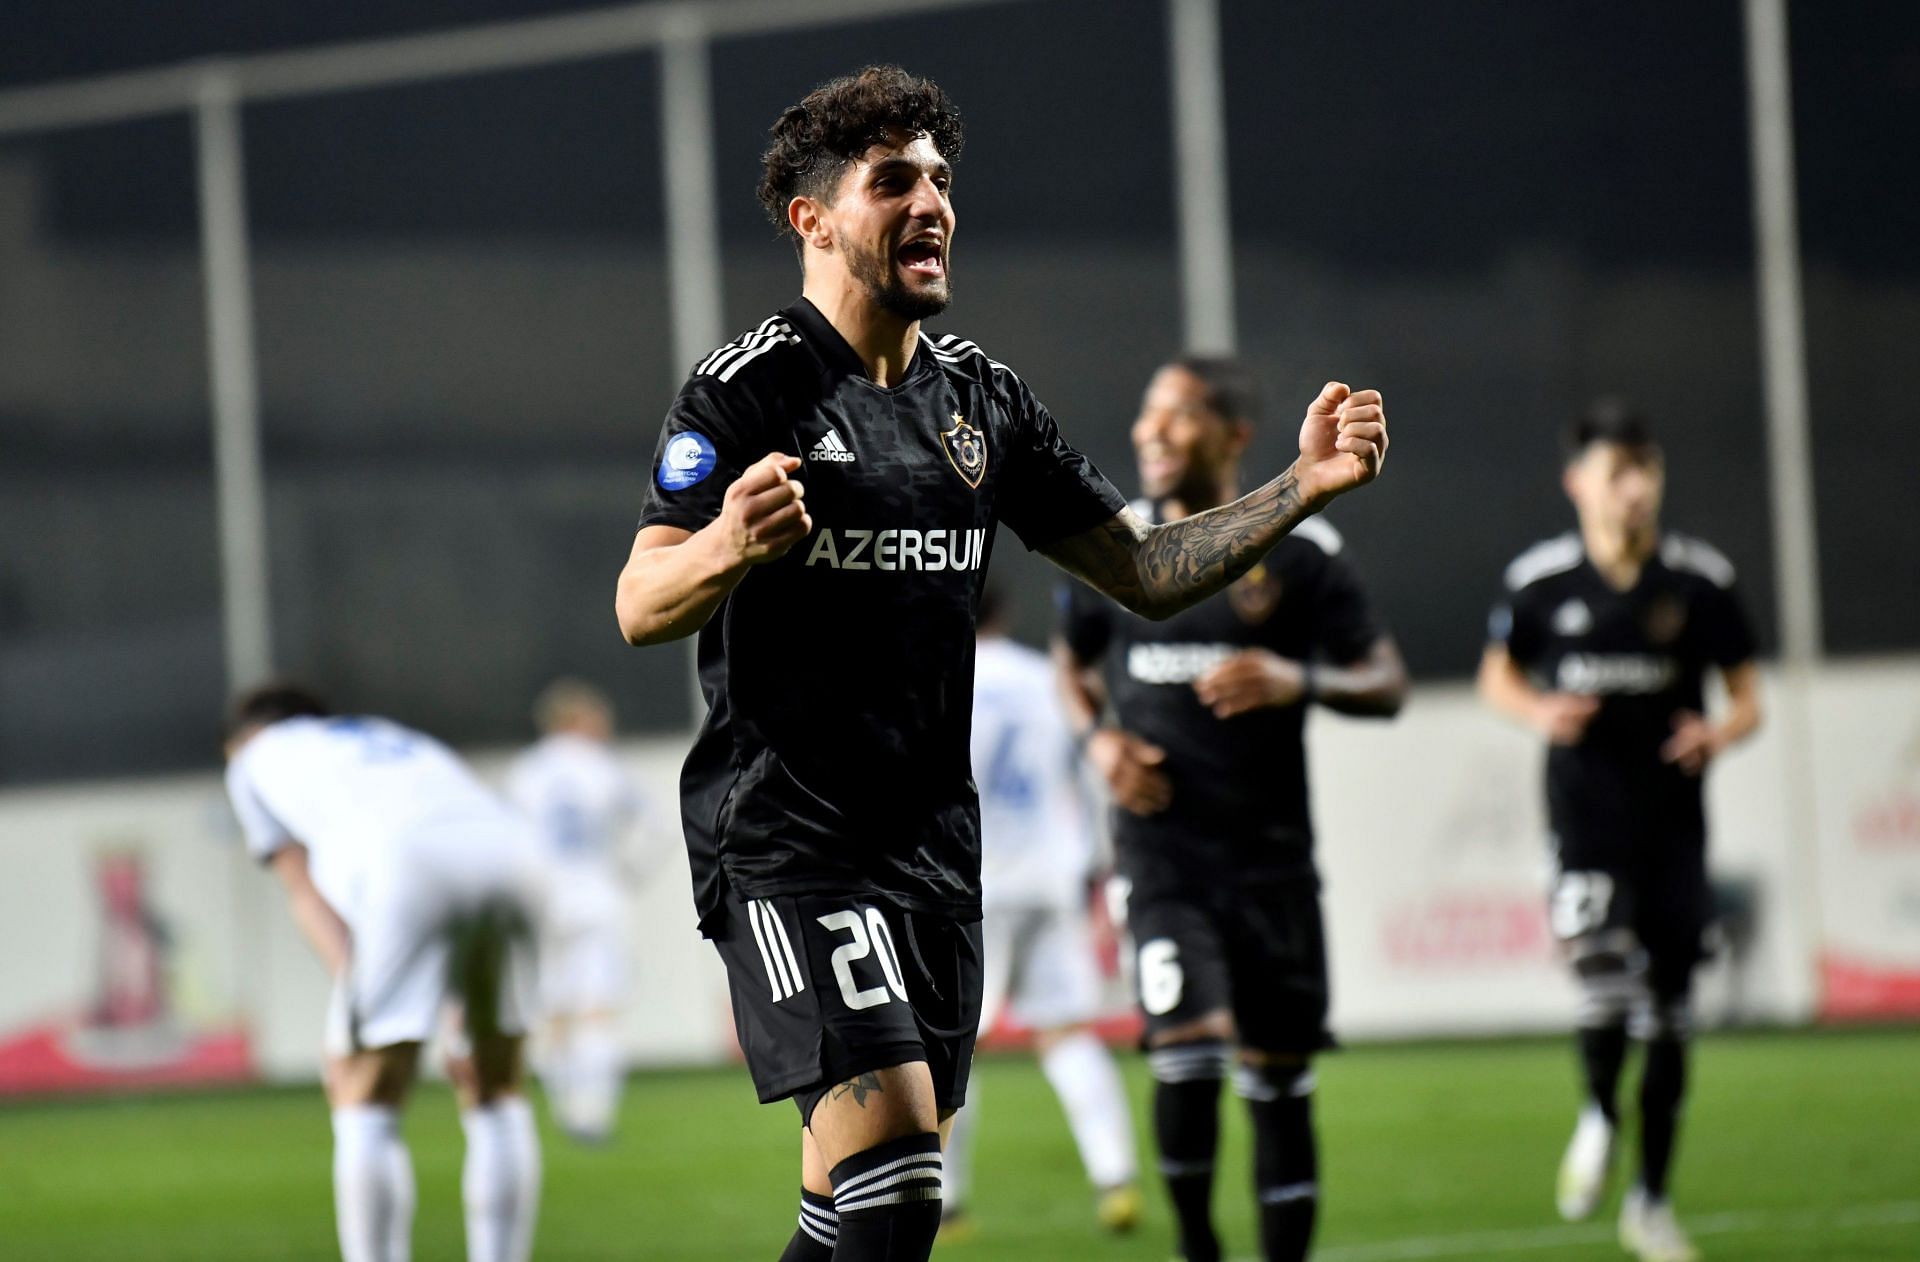 Qarabag will face Zurich in Champions League qualifying on Tuesday.